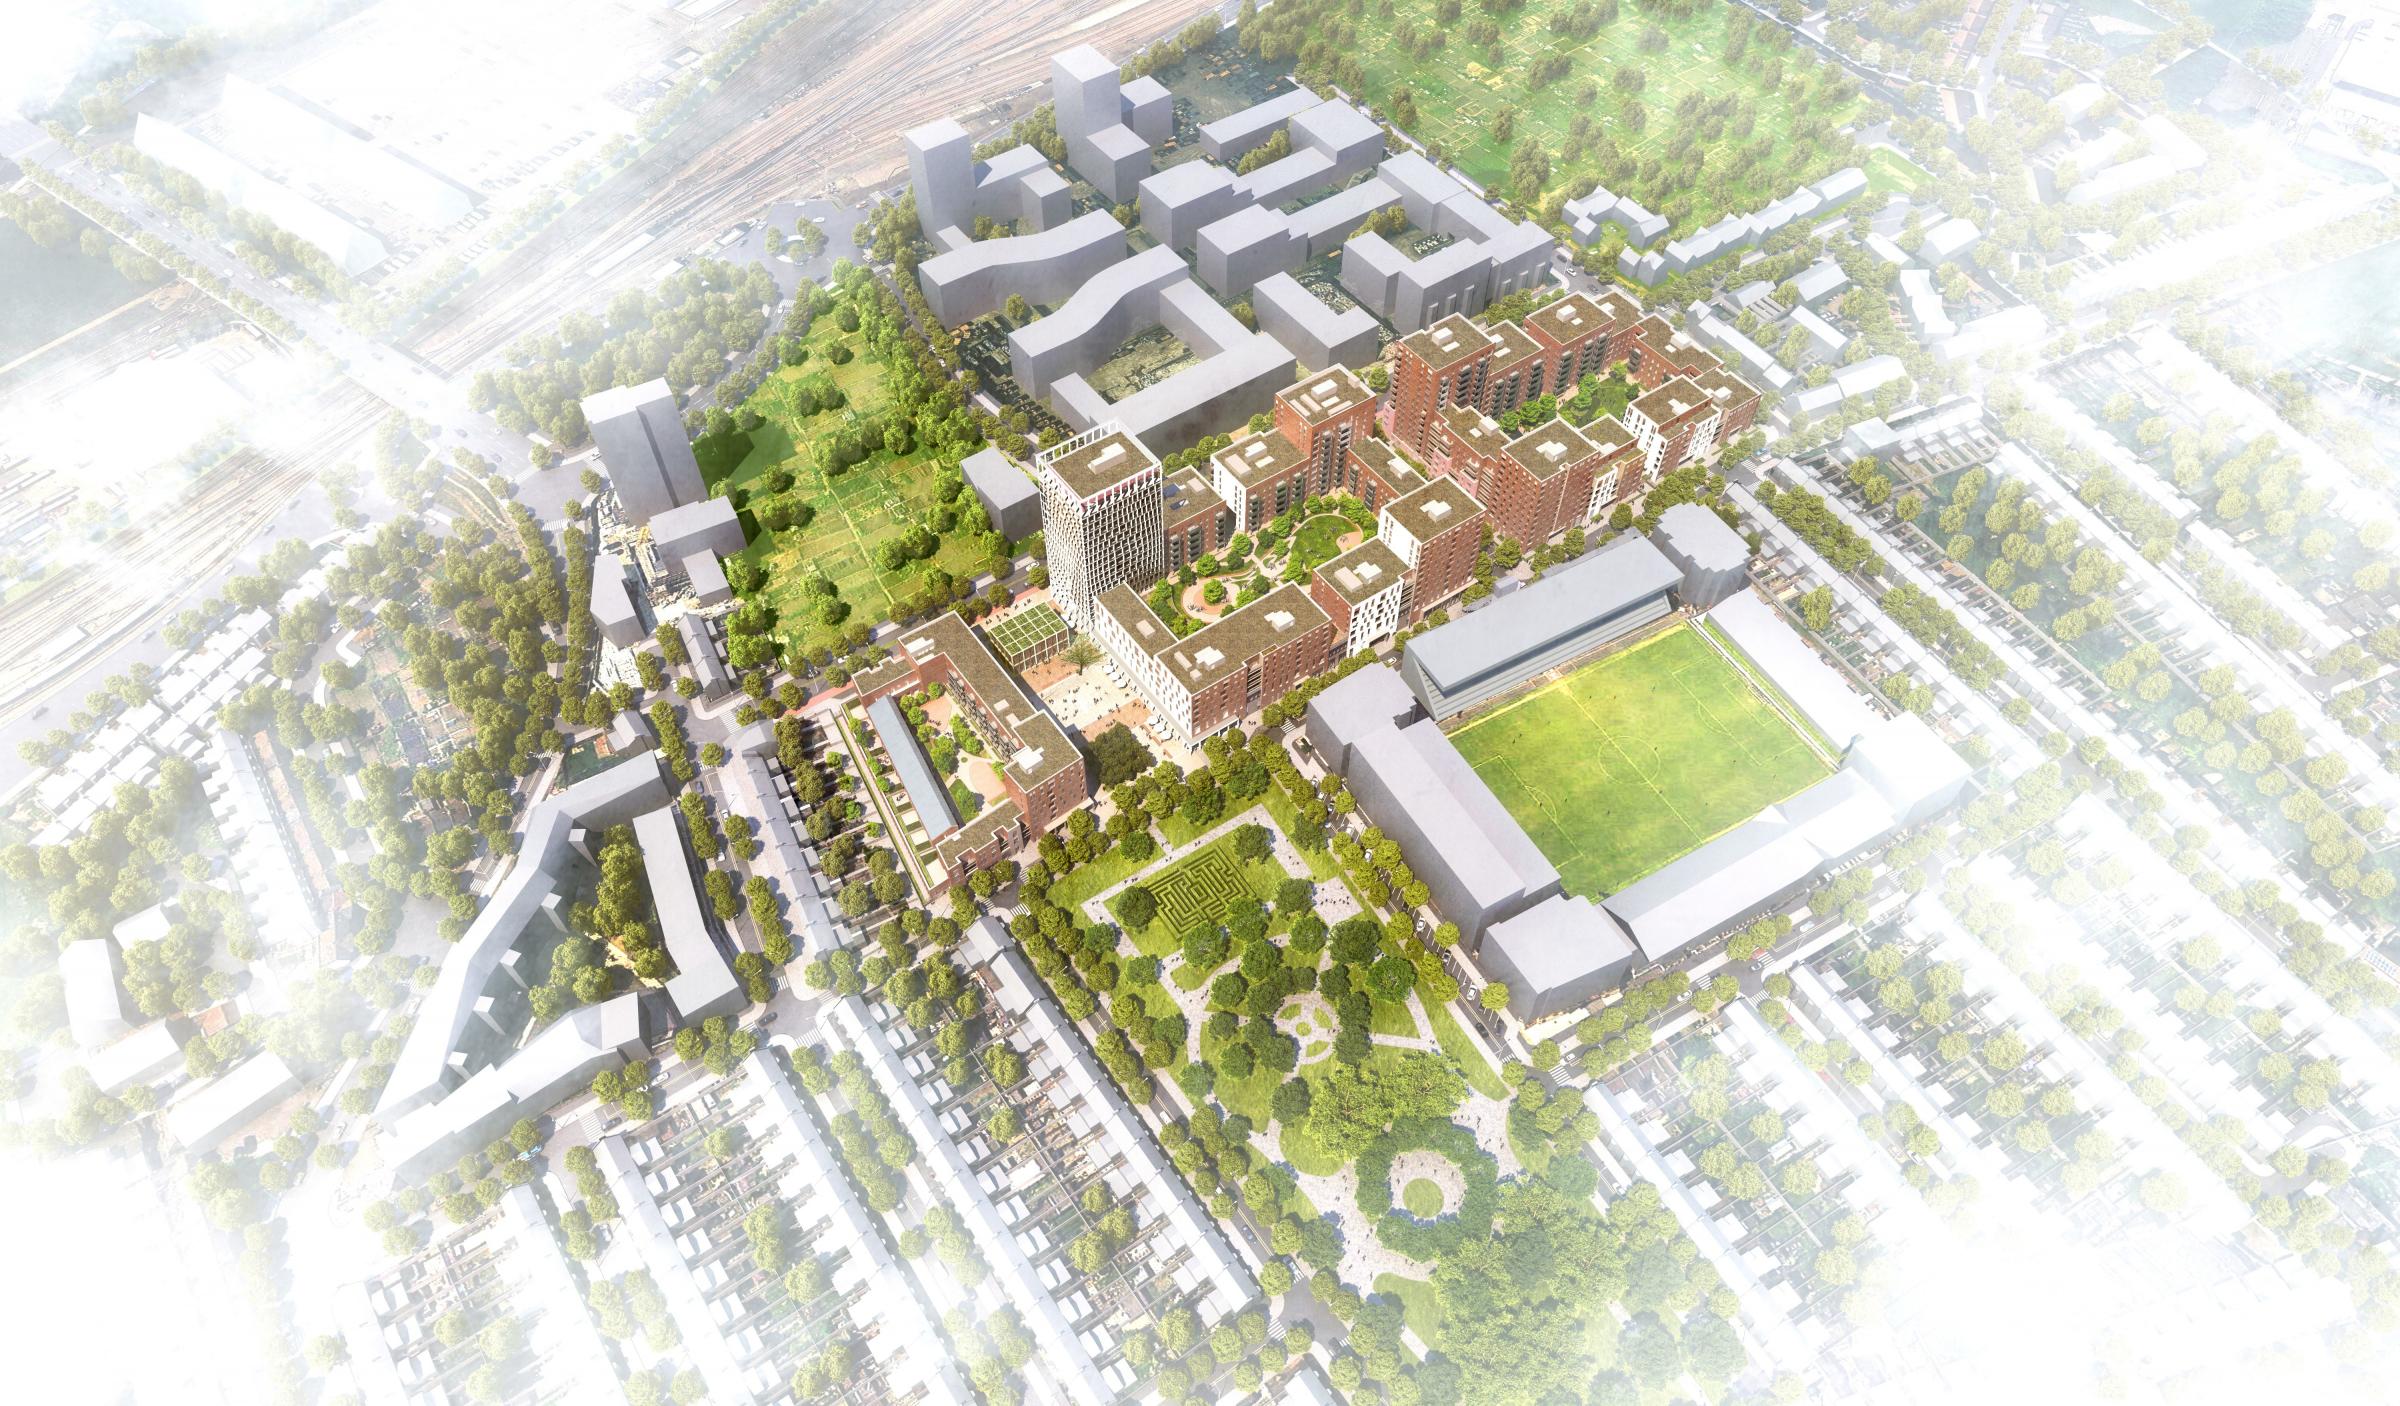 An aerial shot of the development project